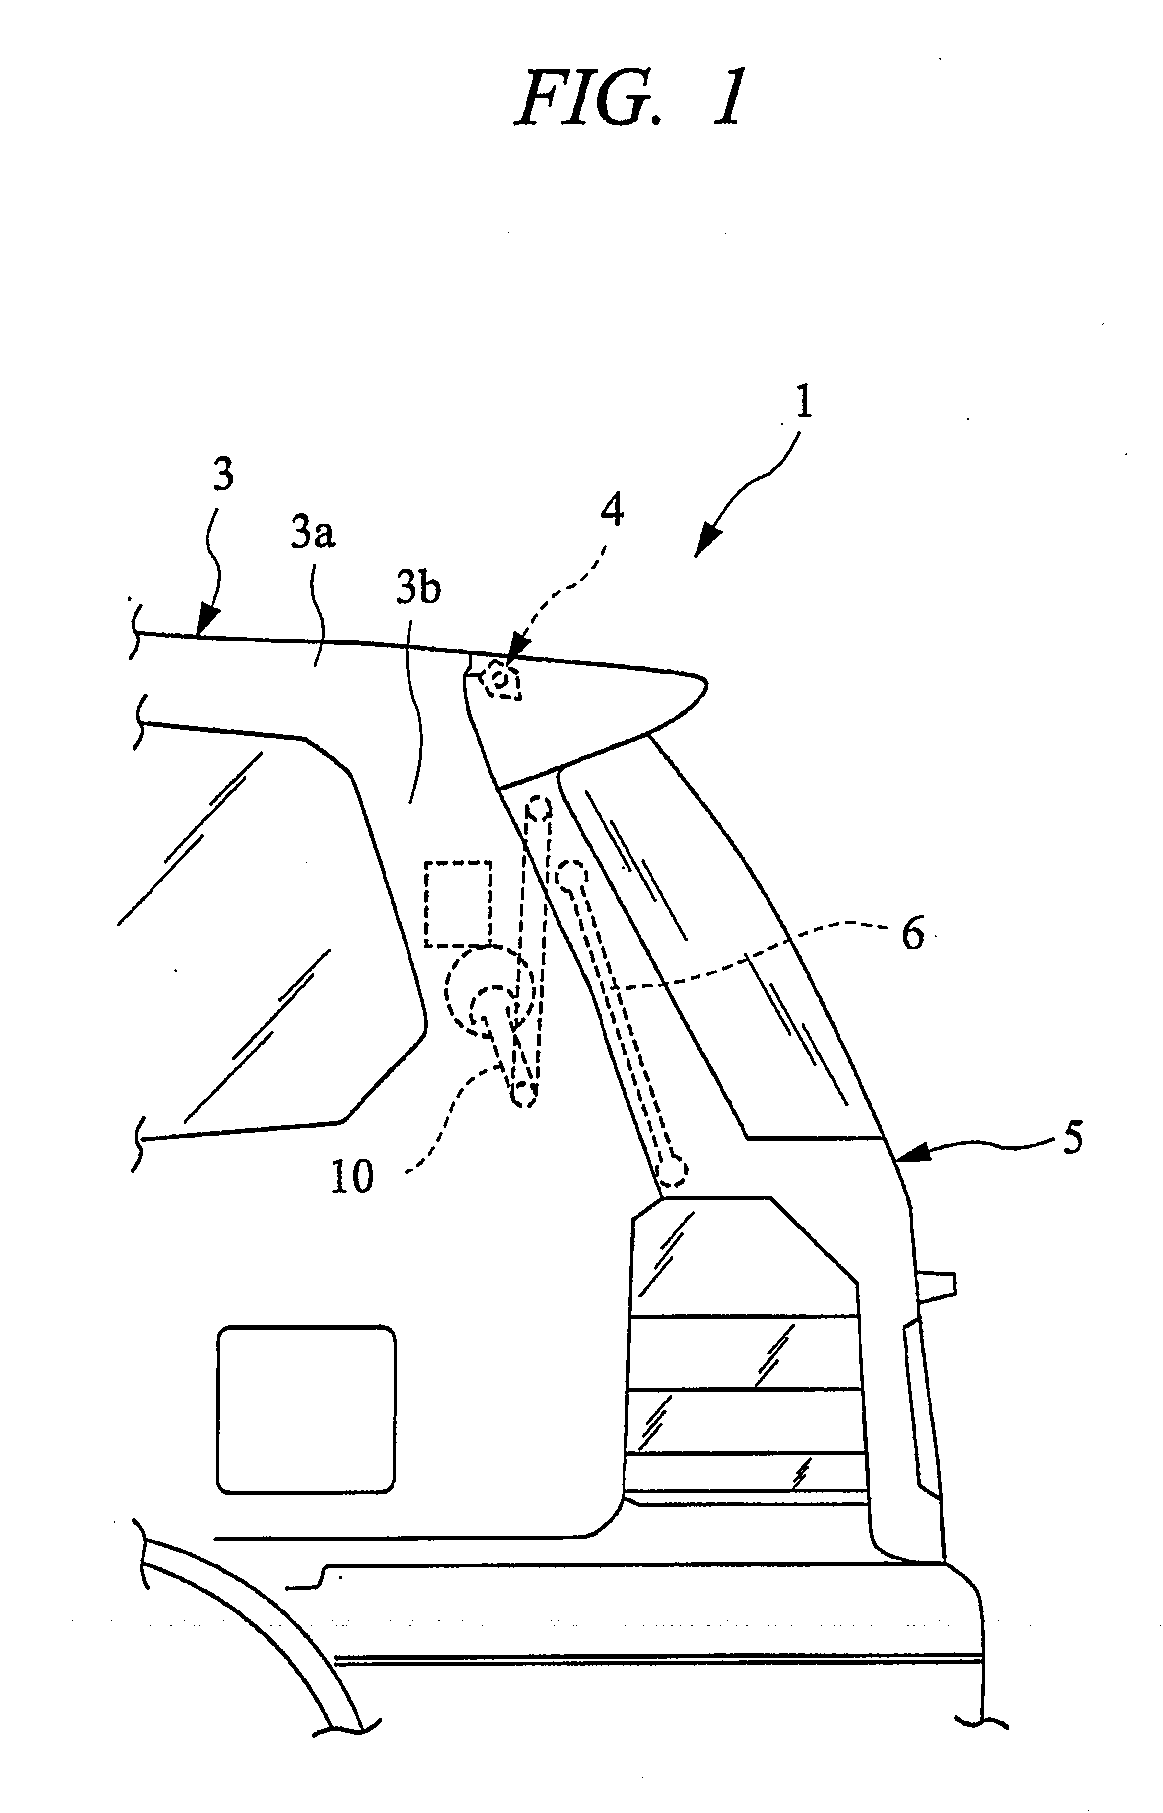 Electric opening/closing device for vehicle